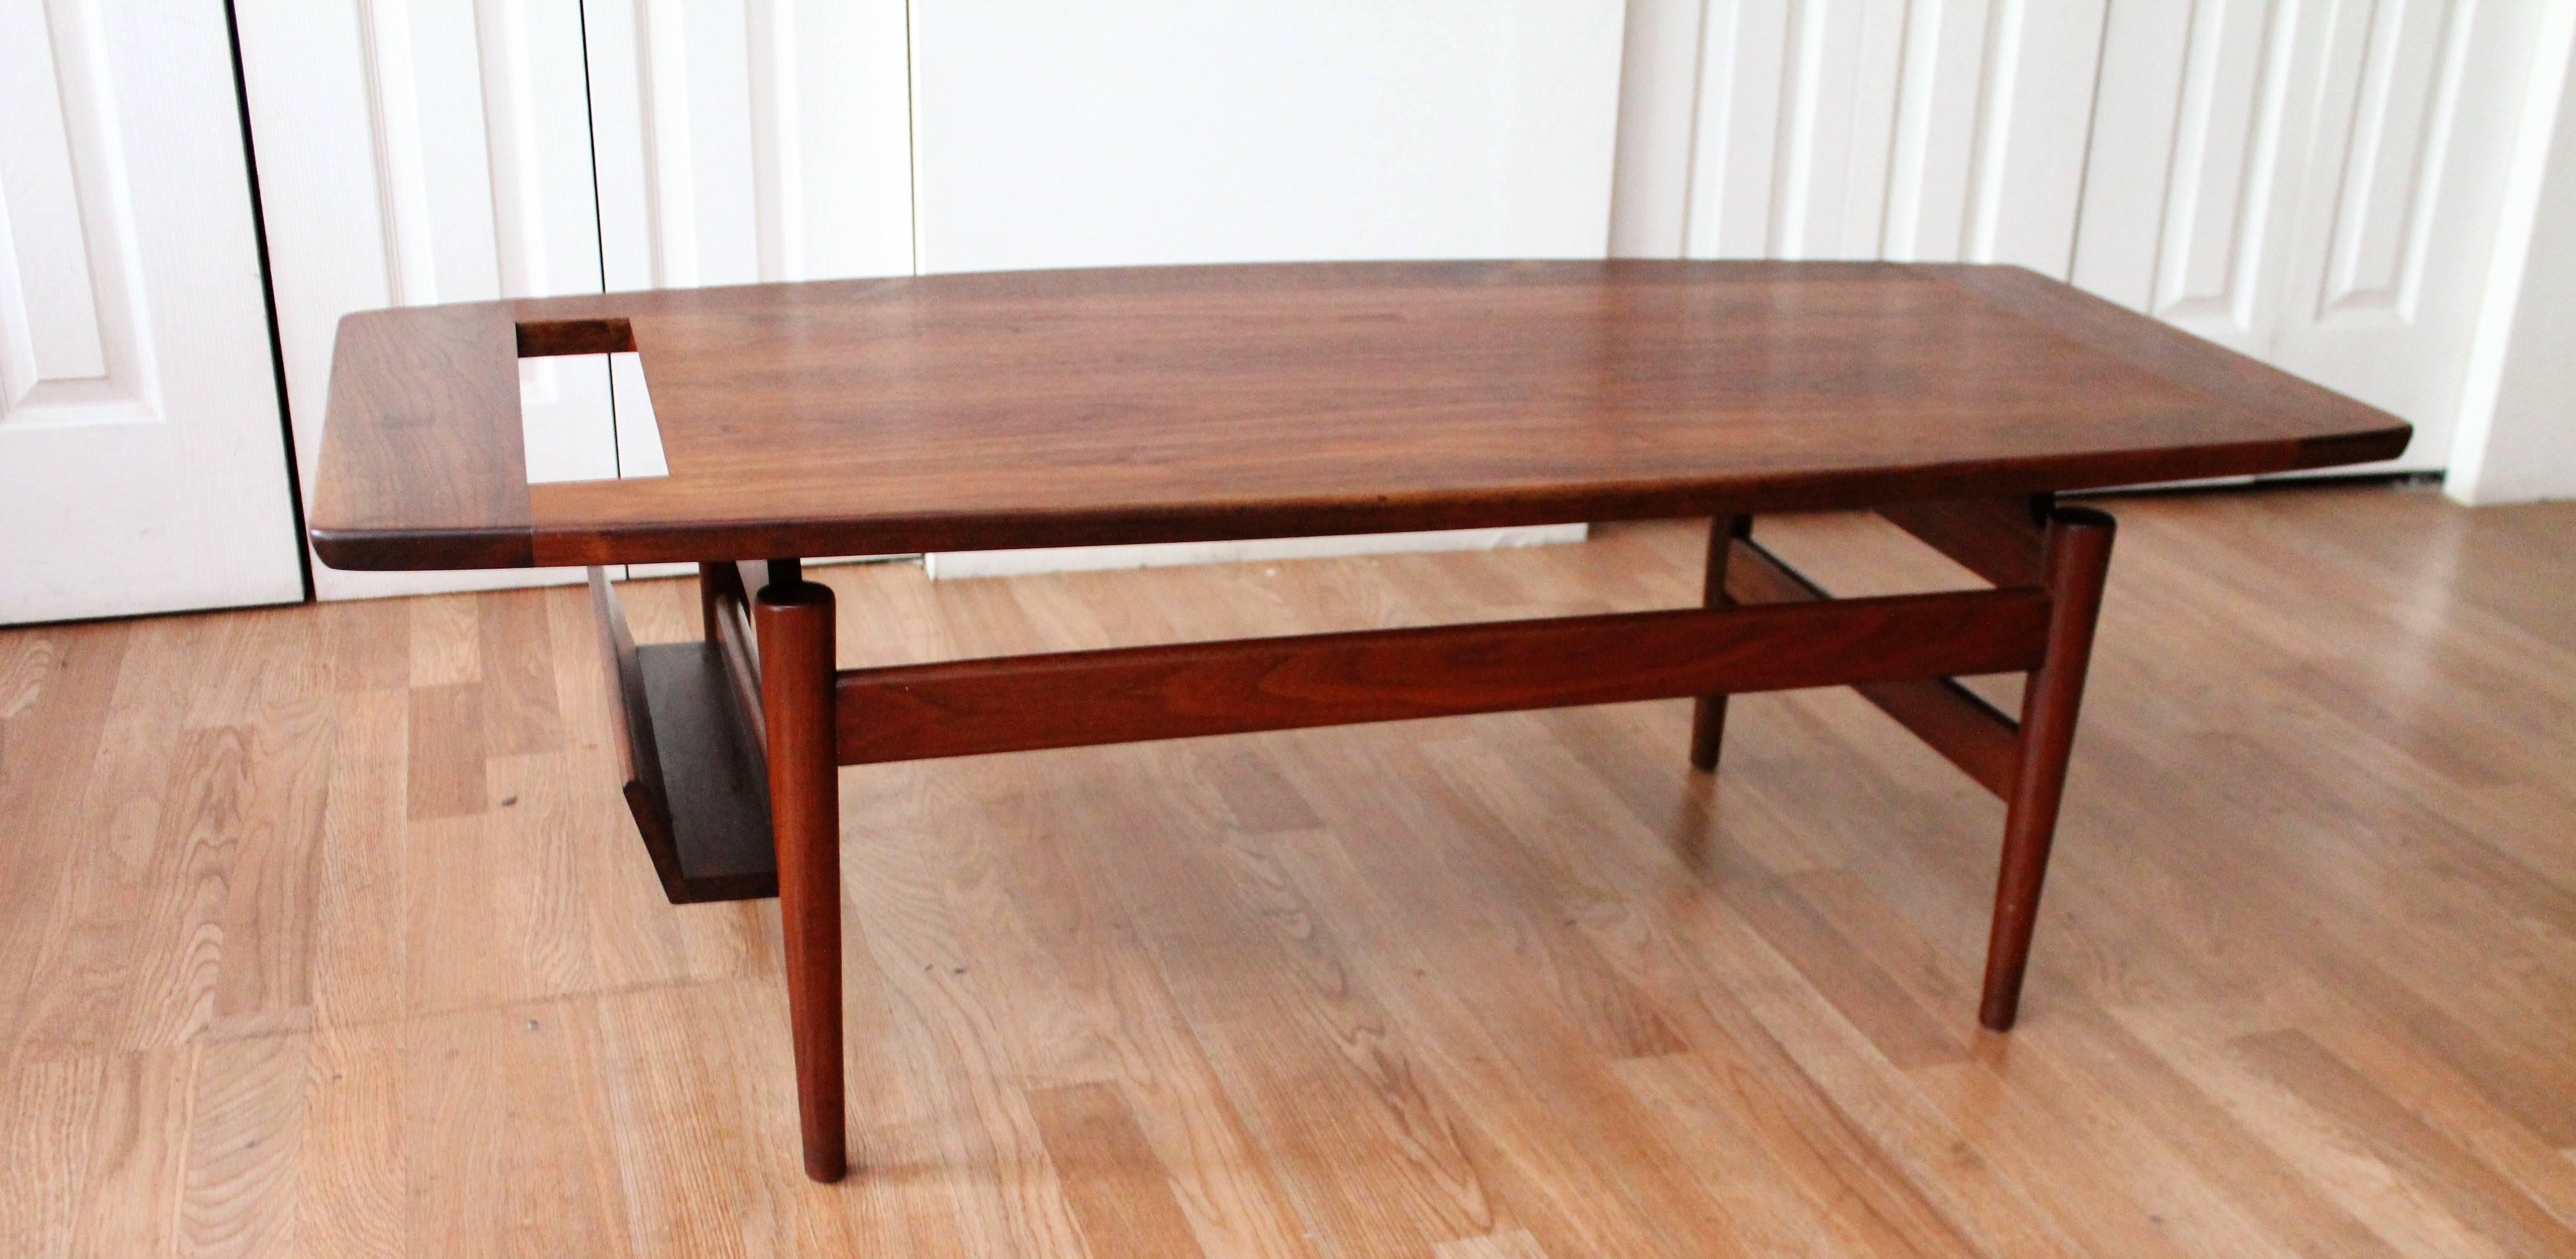 Oiled Jens Risom Coffee Table with Magazine Rack